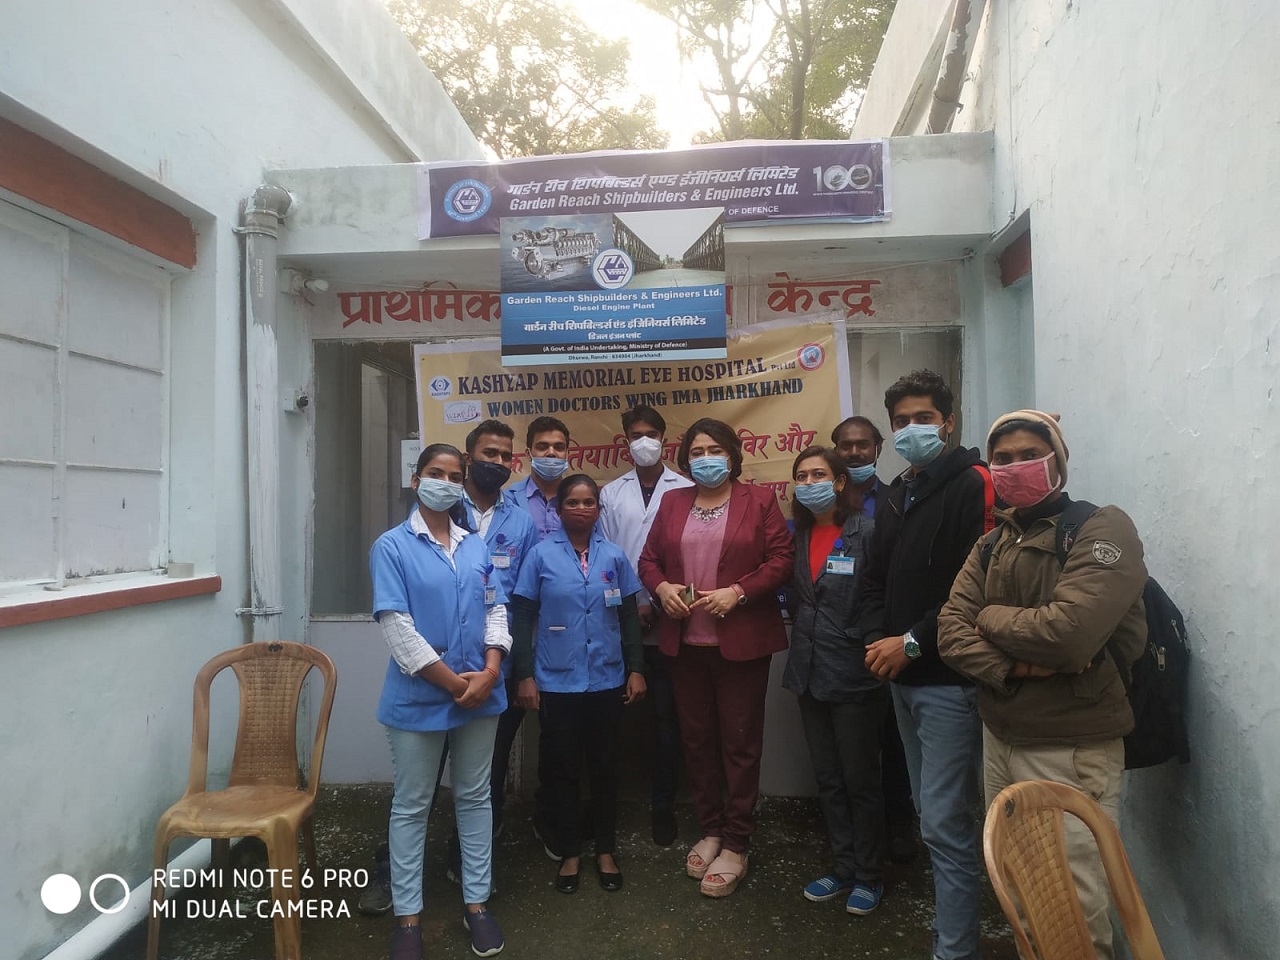 Dr. Bharti Kashyap: Cataract Screening and Surgery Camp with Garden Reach Shipbuilders & Engineers Ltd and Hinoo Puja Committee, Ranchi